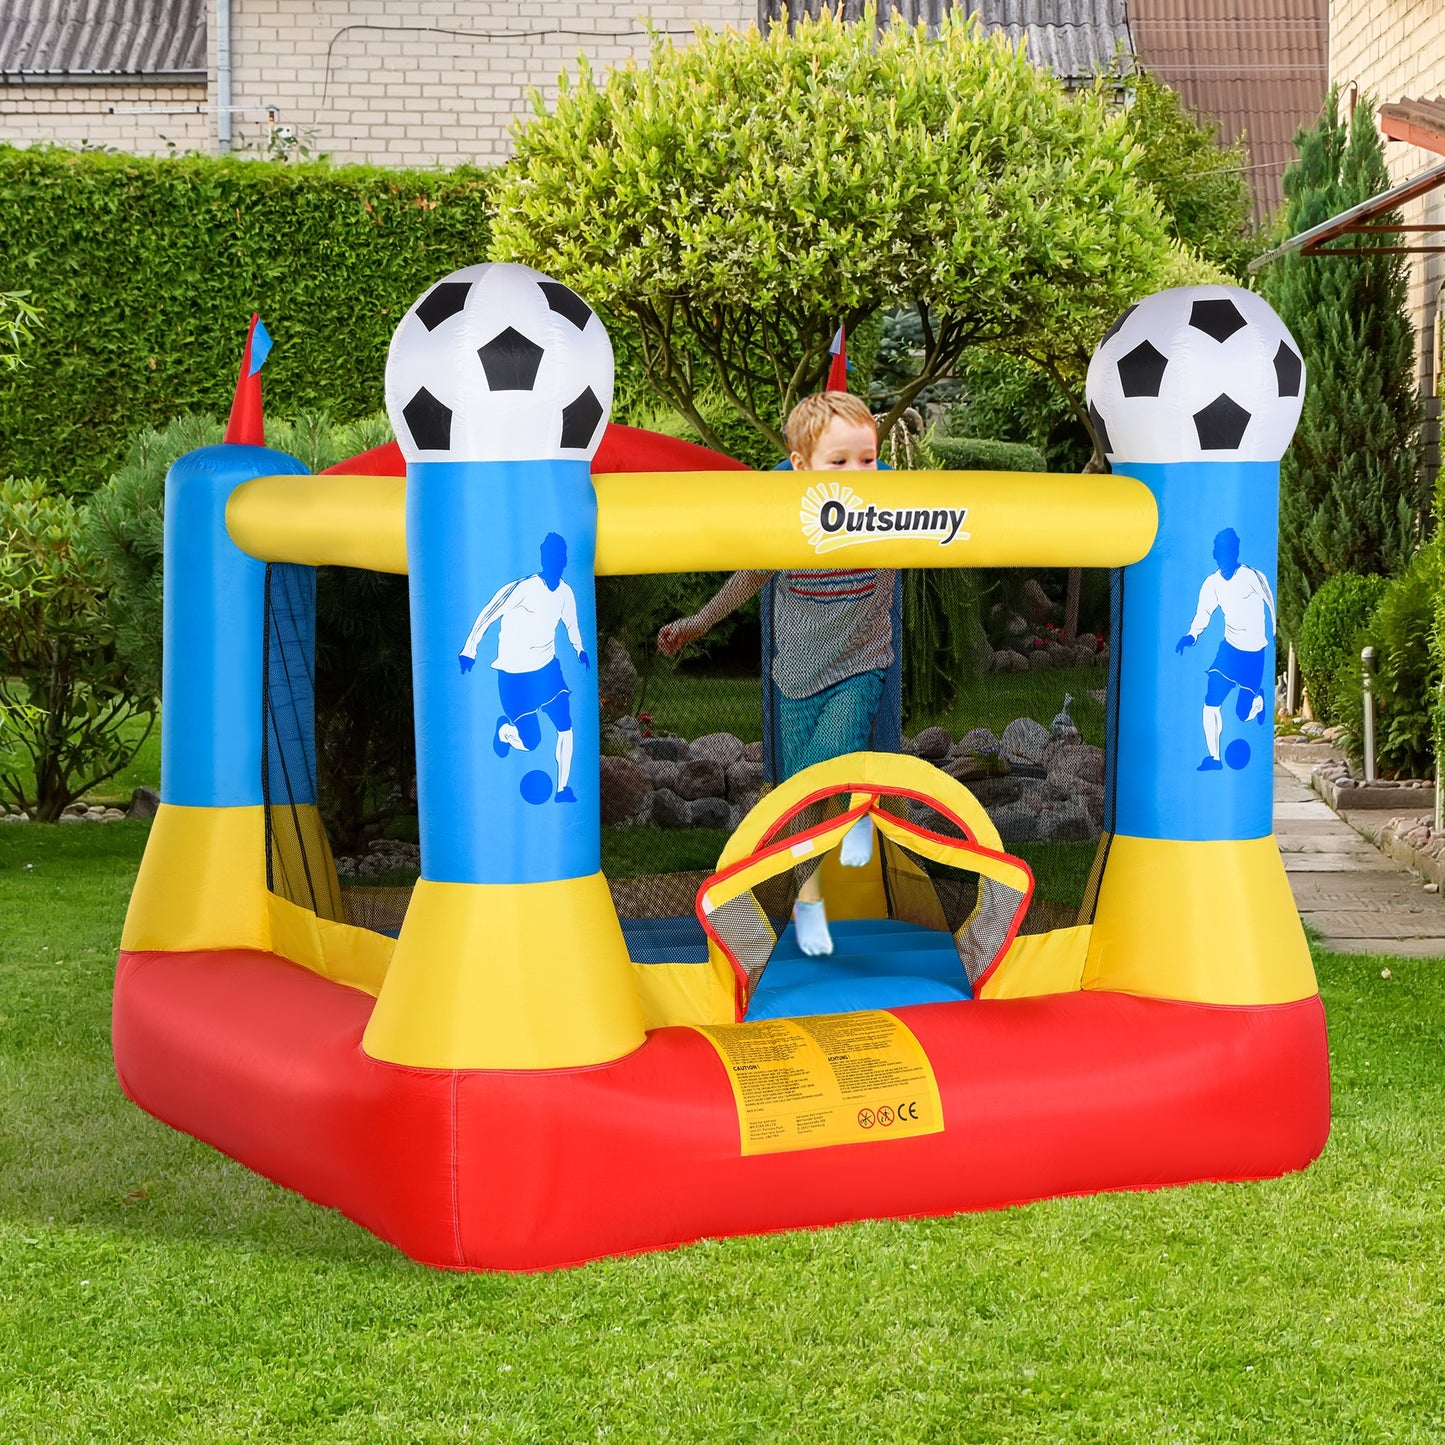 Outsunny Kids Bouncy Castle House Inflatable Trampoline with Blower for Kids Age 3-12 Football Field Design 2.25 x 2.2 x 1.95m